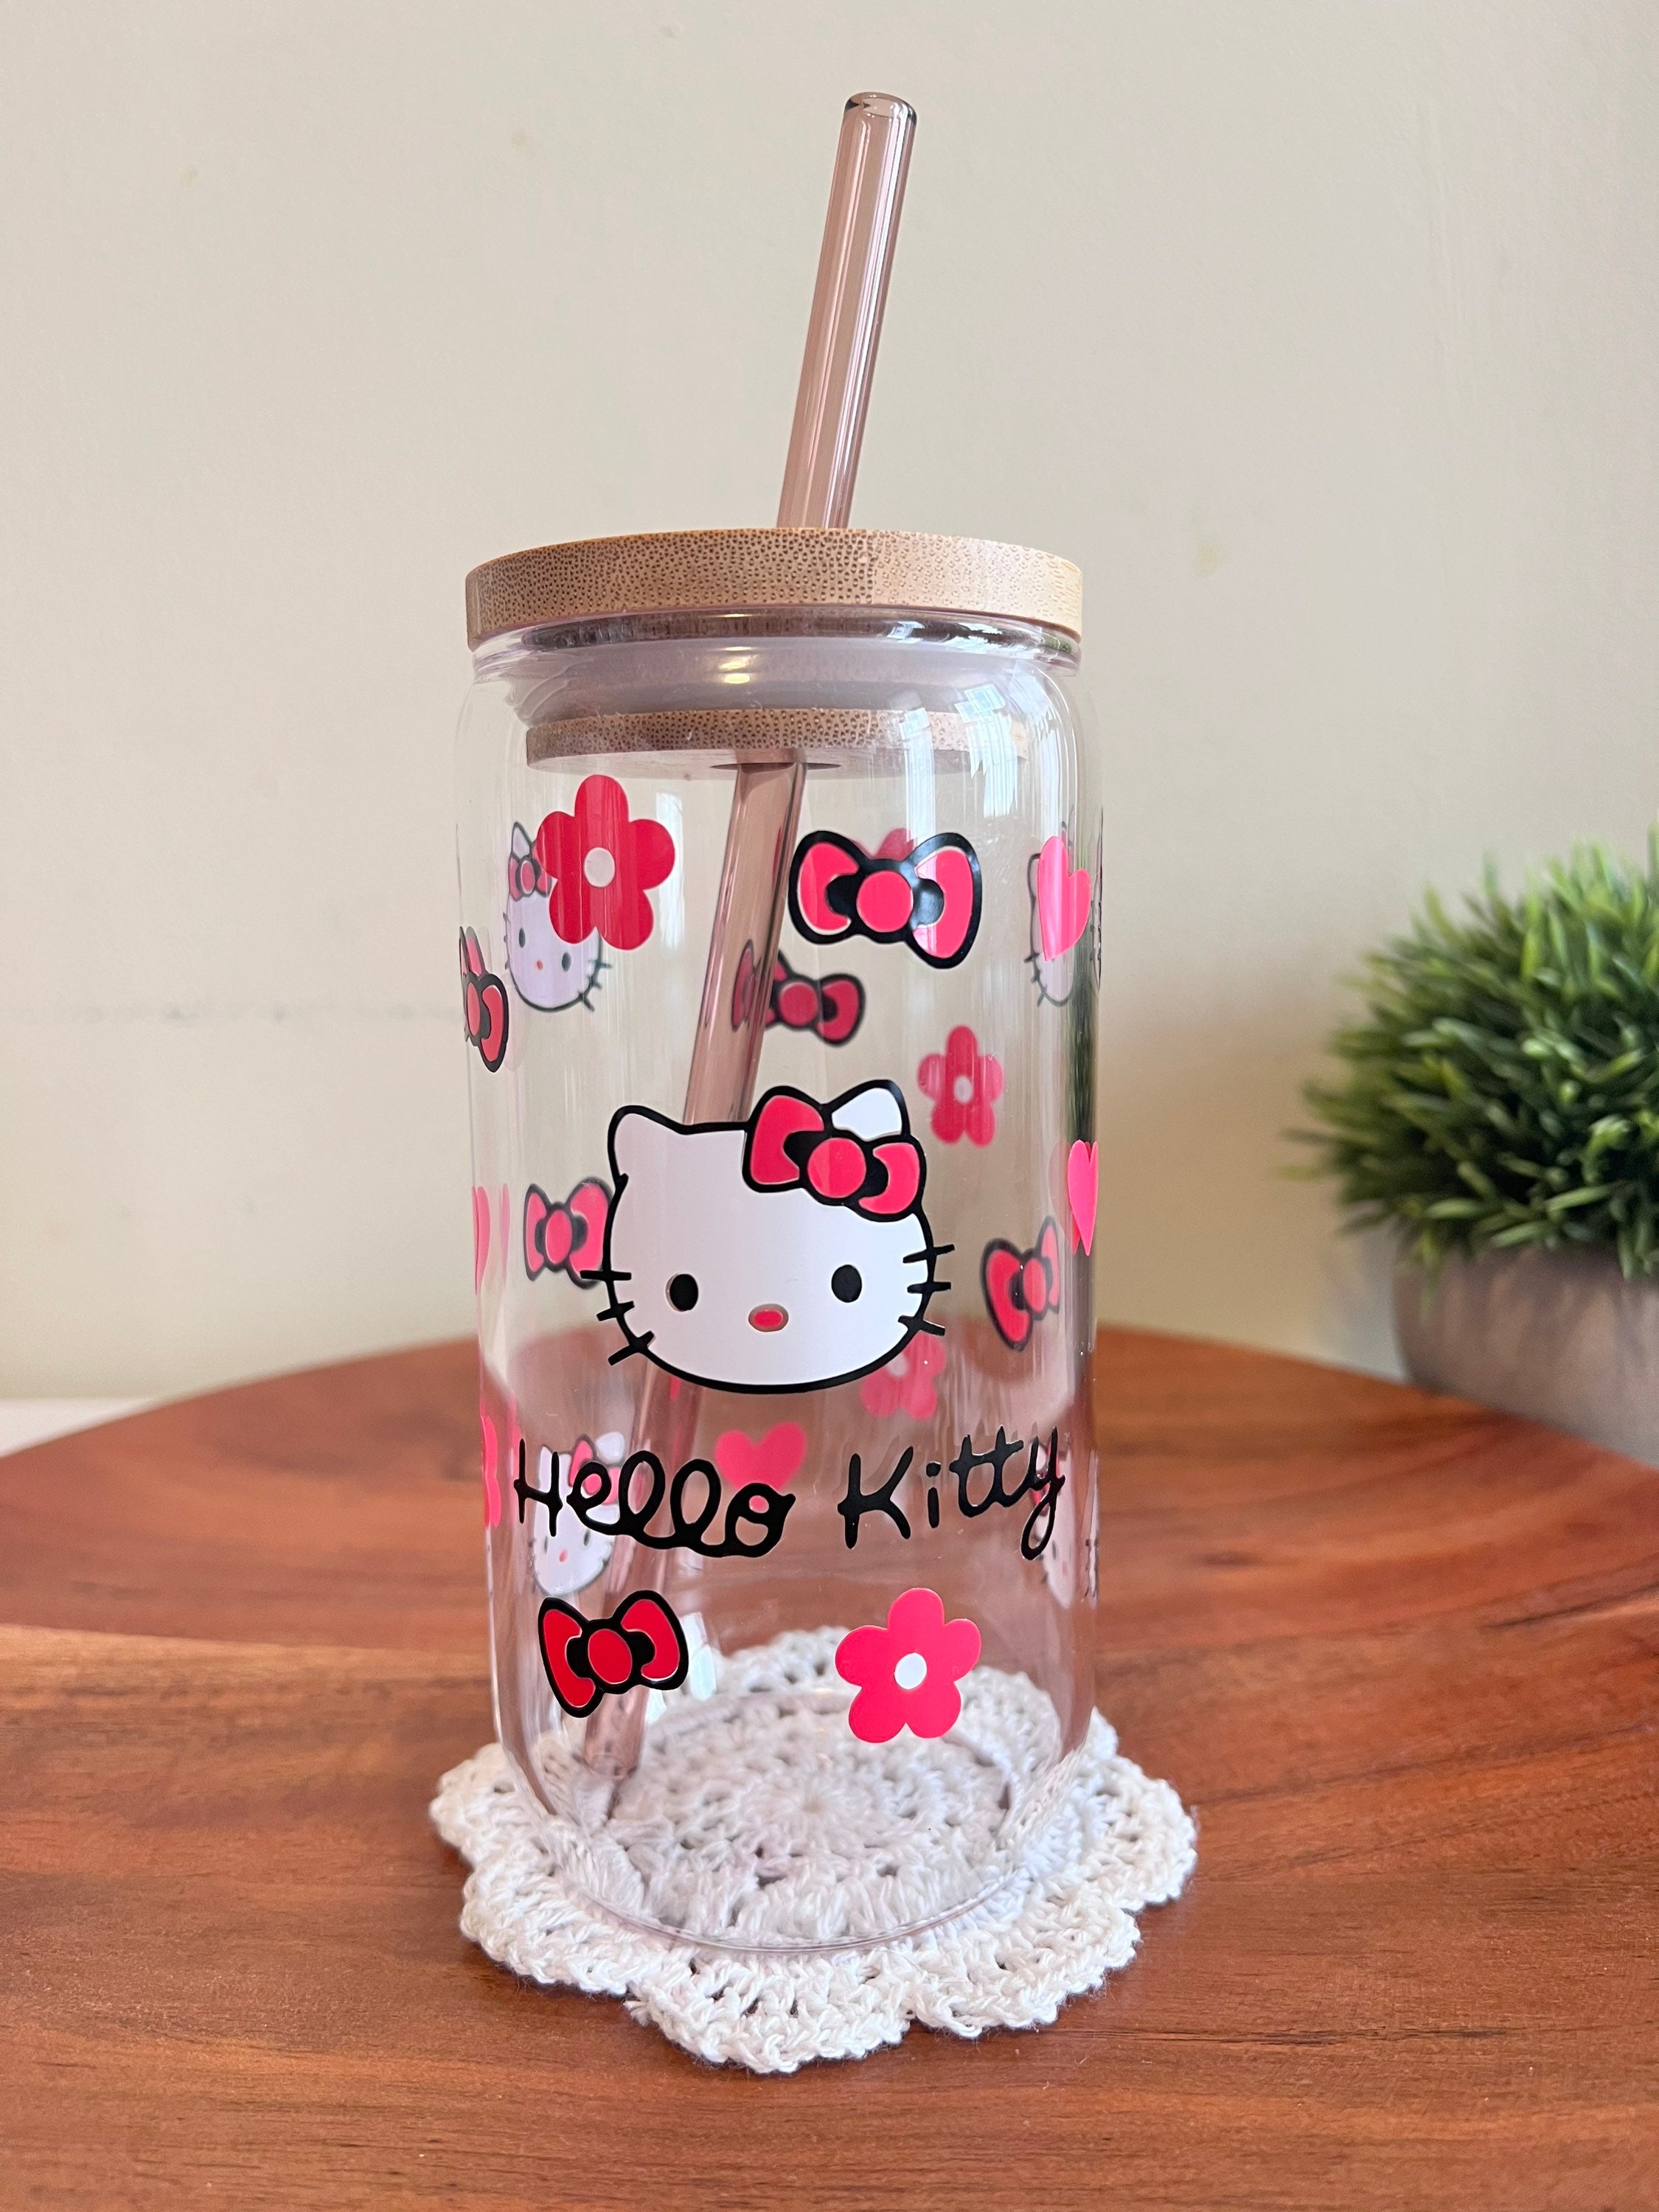 Hello Kitty Christmas Glass Tumbler With Lid And Straw 16 Oz NEW (SET OF 2)